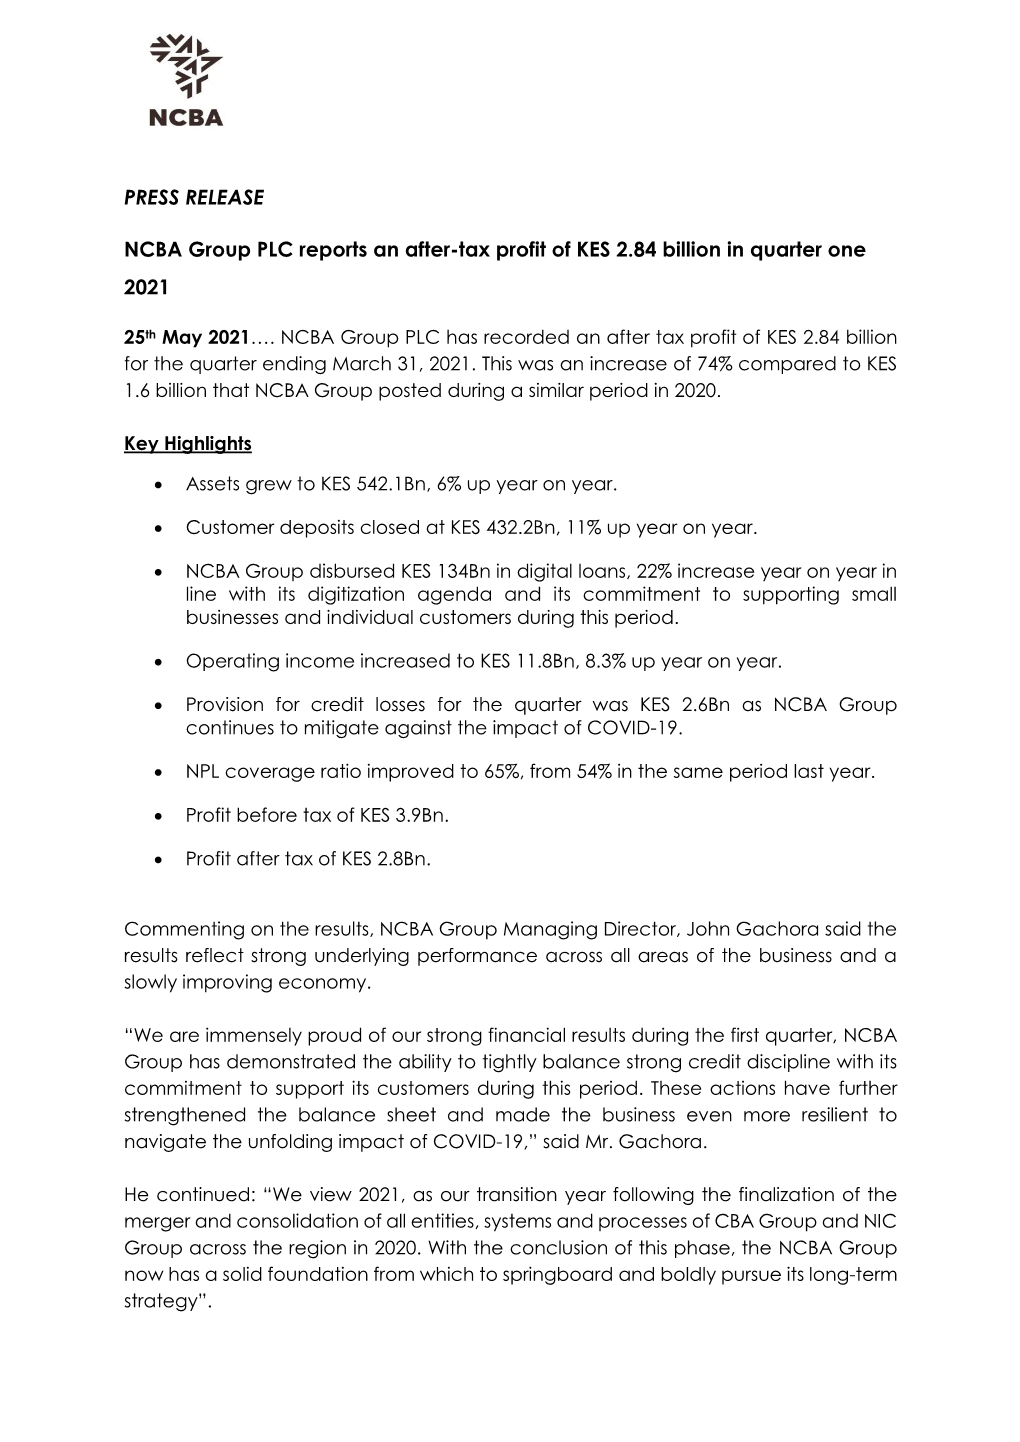 NCBA Group PLC Reports an After-Tax Profit of KES 2.84 Billion in Quarter One 2021